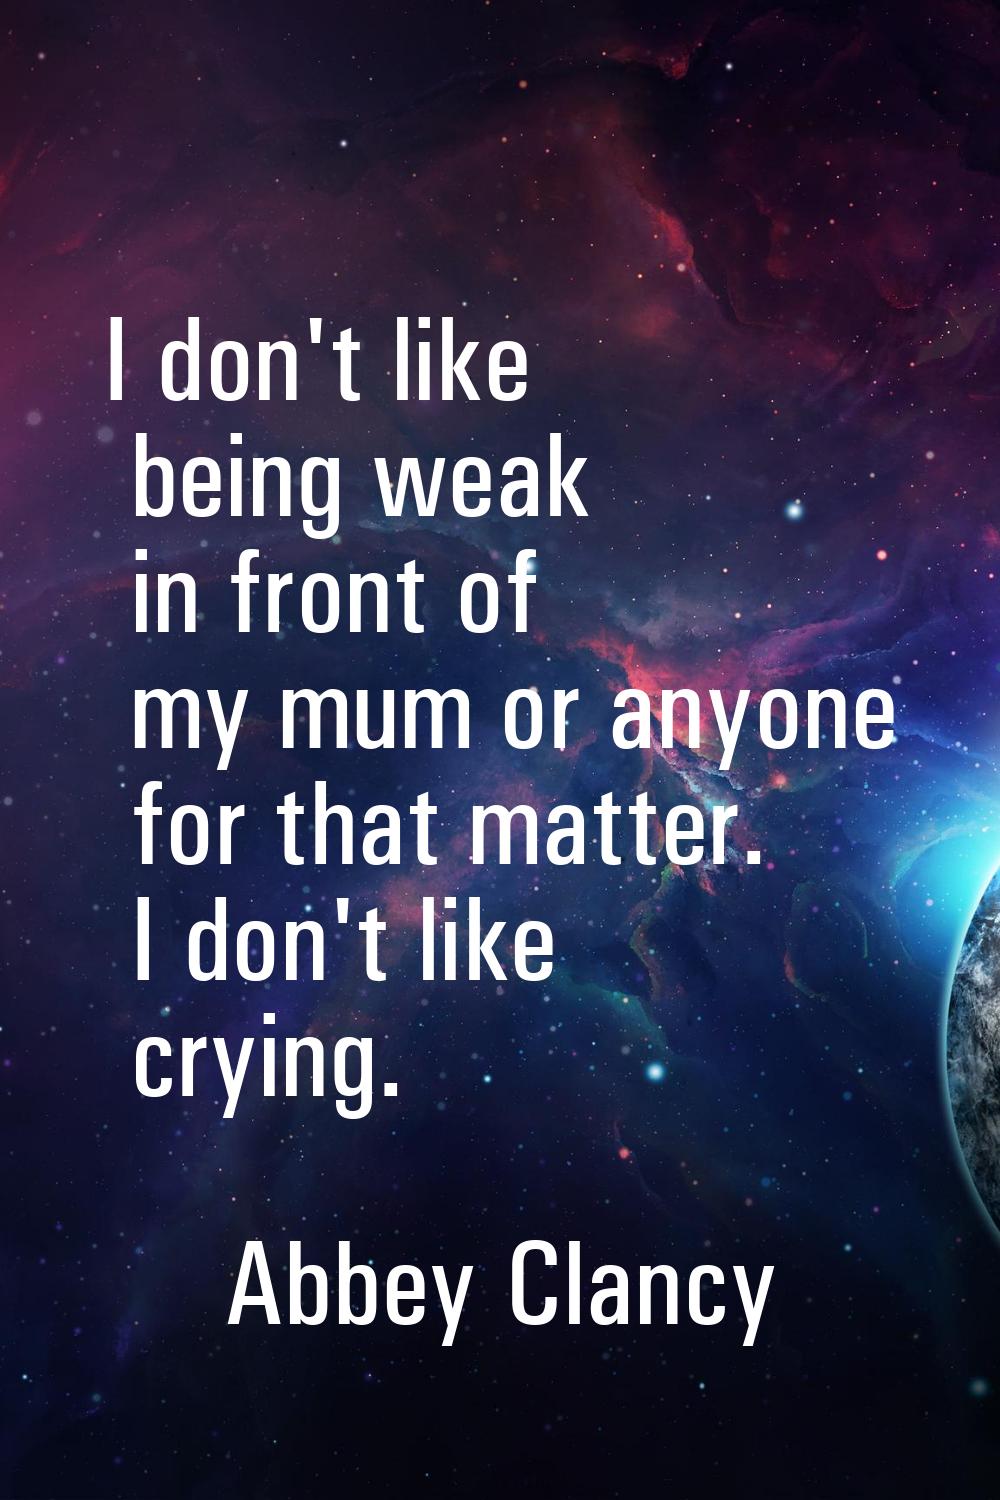 I don't like being weak in front of my mum or anyone for that matter. I don't like crying.